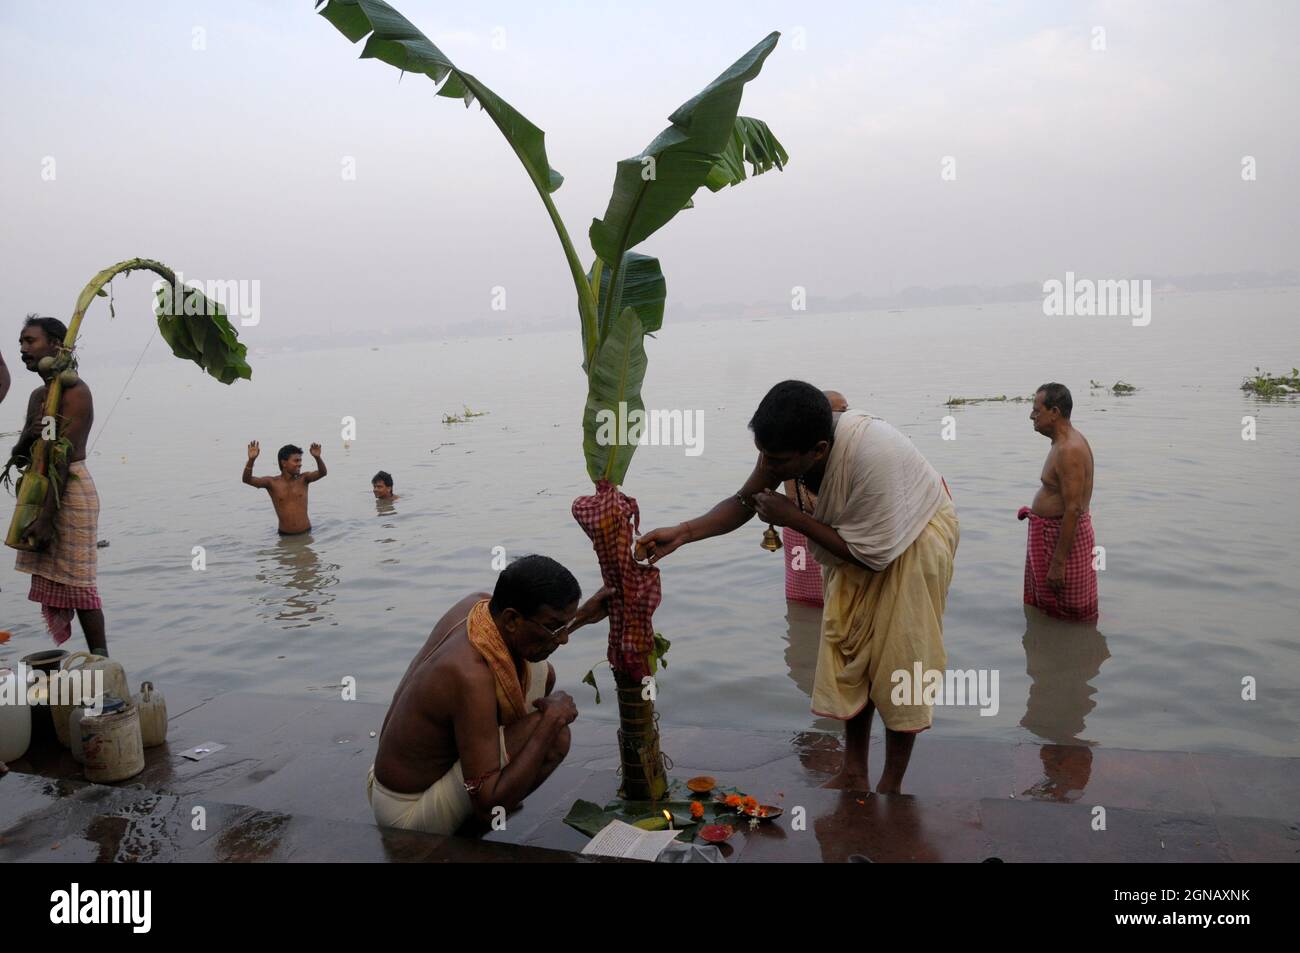 A Banana tree being worshipped to commence Durga Puja on the banks of river Ganga also known as Hoogly, in Kolkata. Photo by Sondeep Shankar Stock Photo